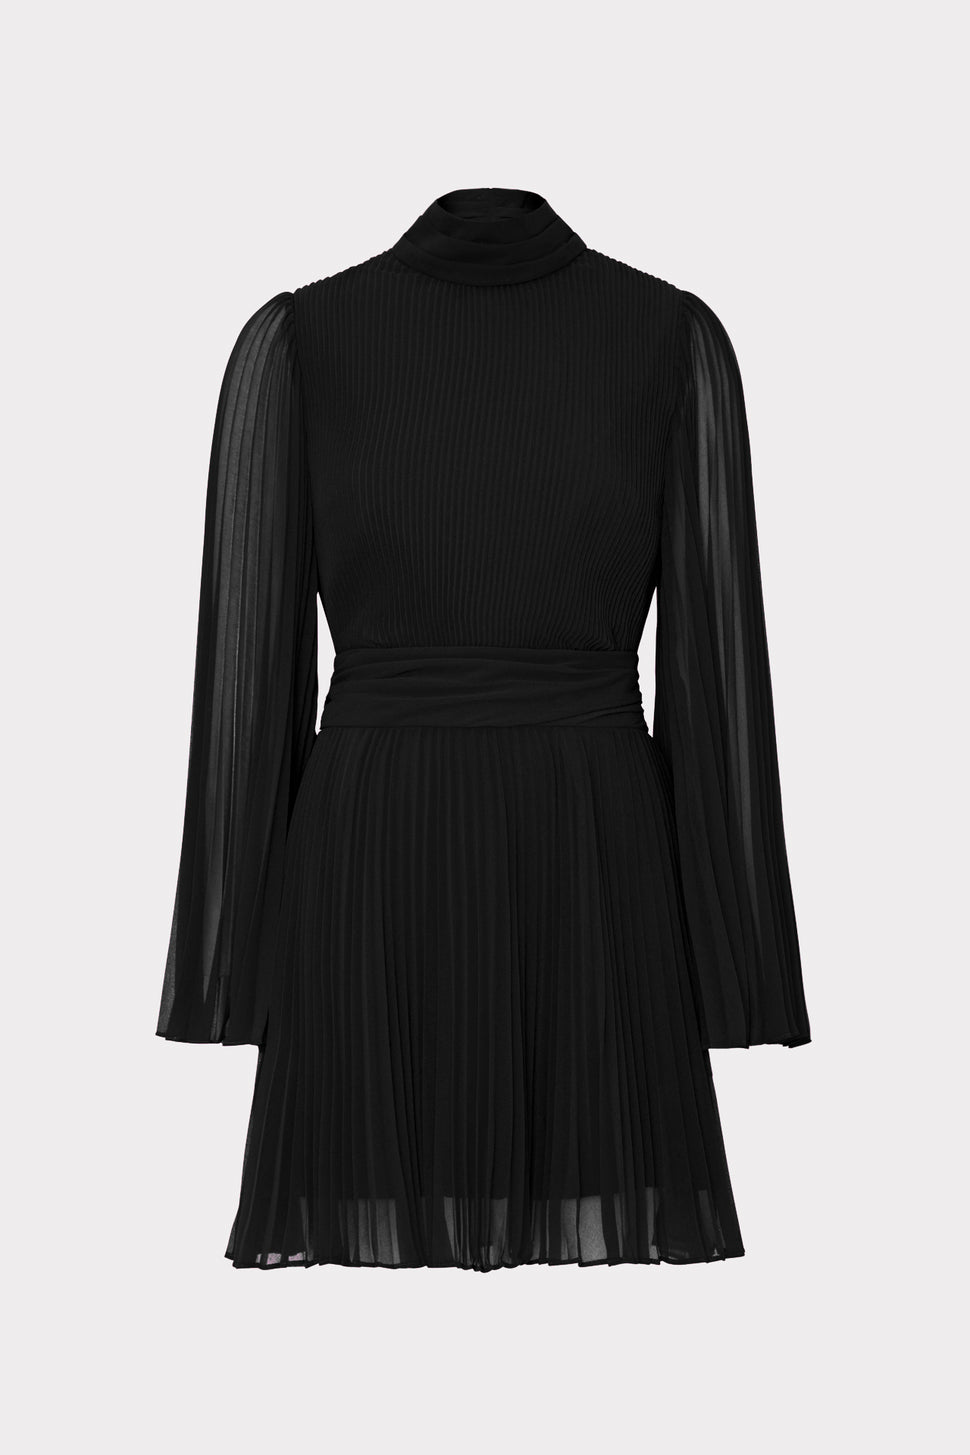 Rosemary Pleated Chiffon Dress in Black - MILLY in Black